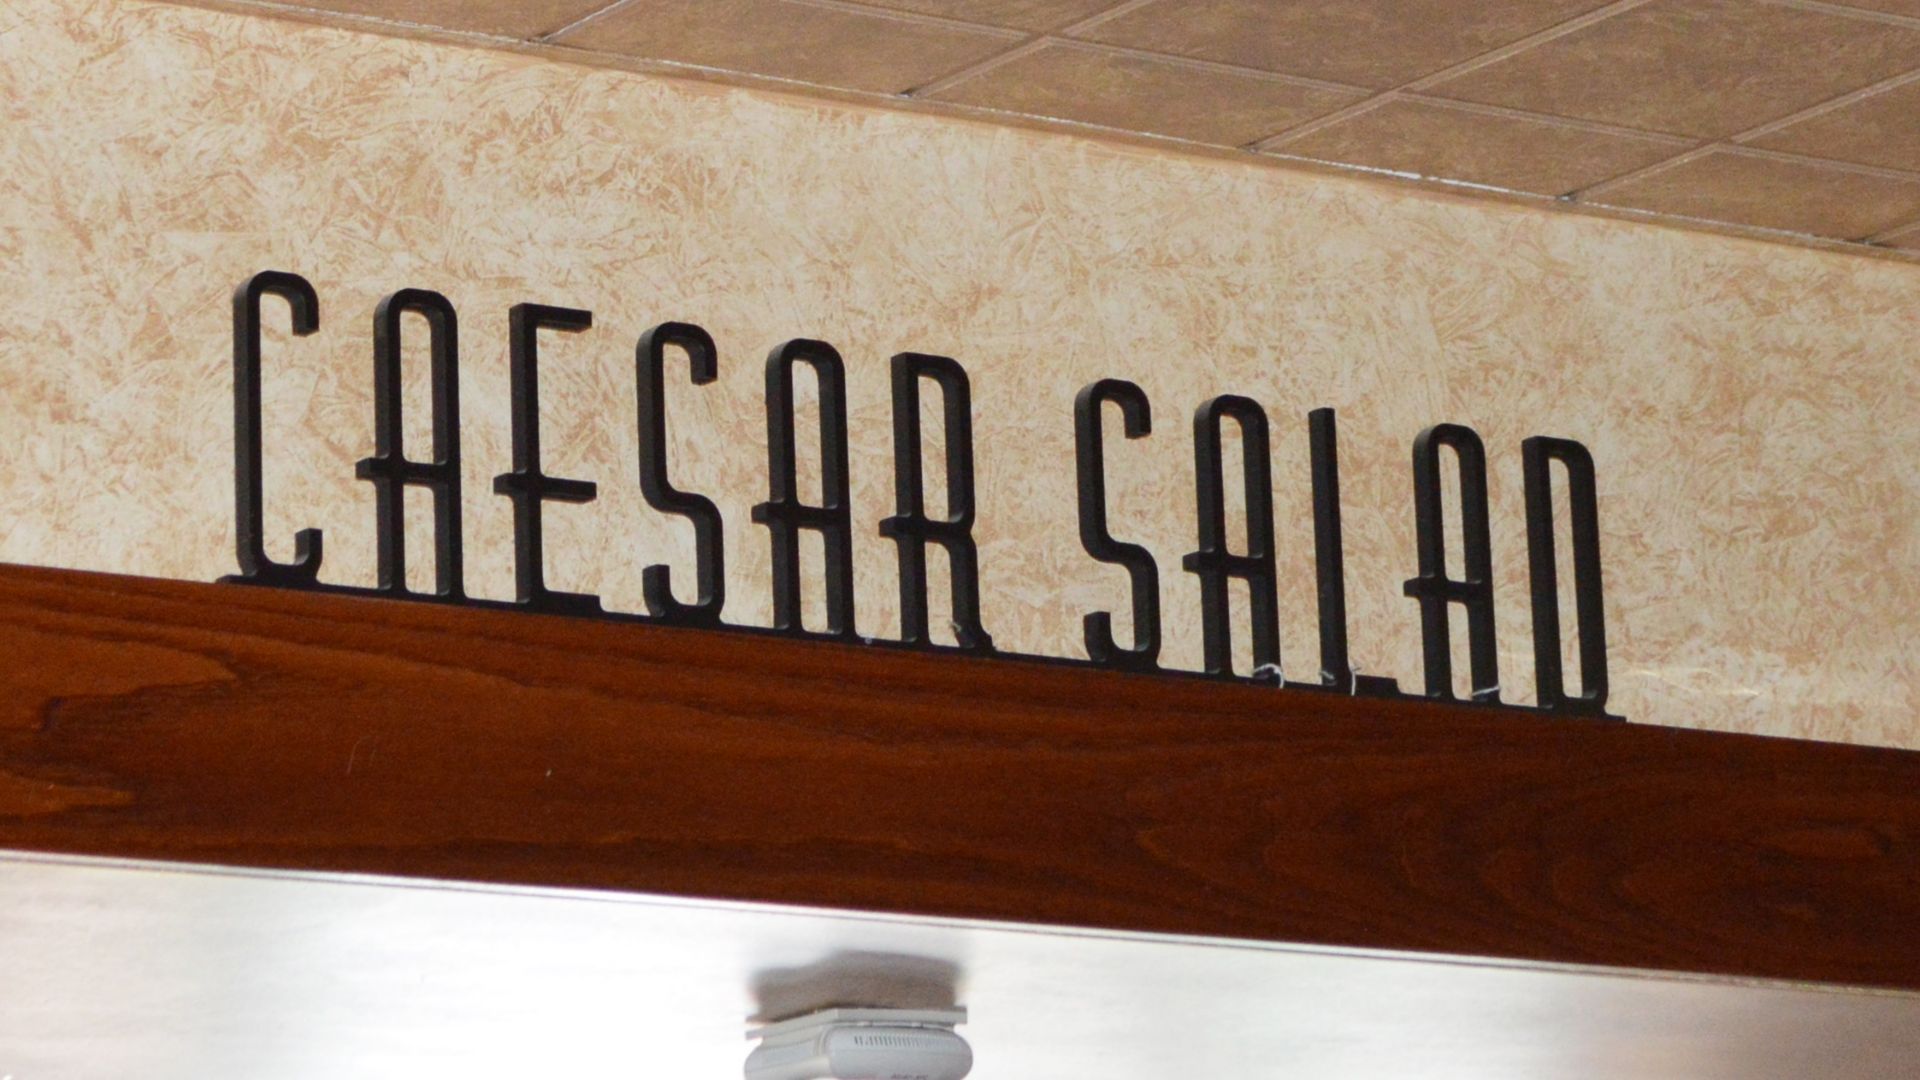 40 x Wooden Signs Suitable For Restaurants, Cafes, Bistros etc - Includes Grills, Amaretto, Penne, - Image 30 of 31